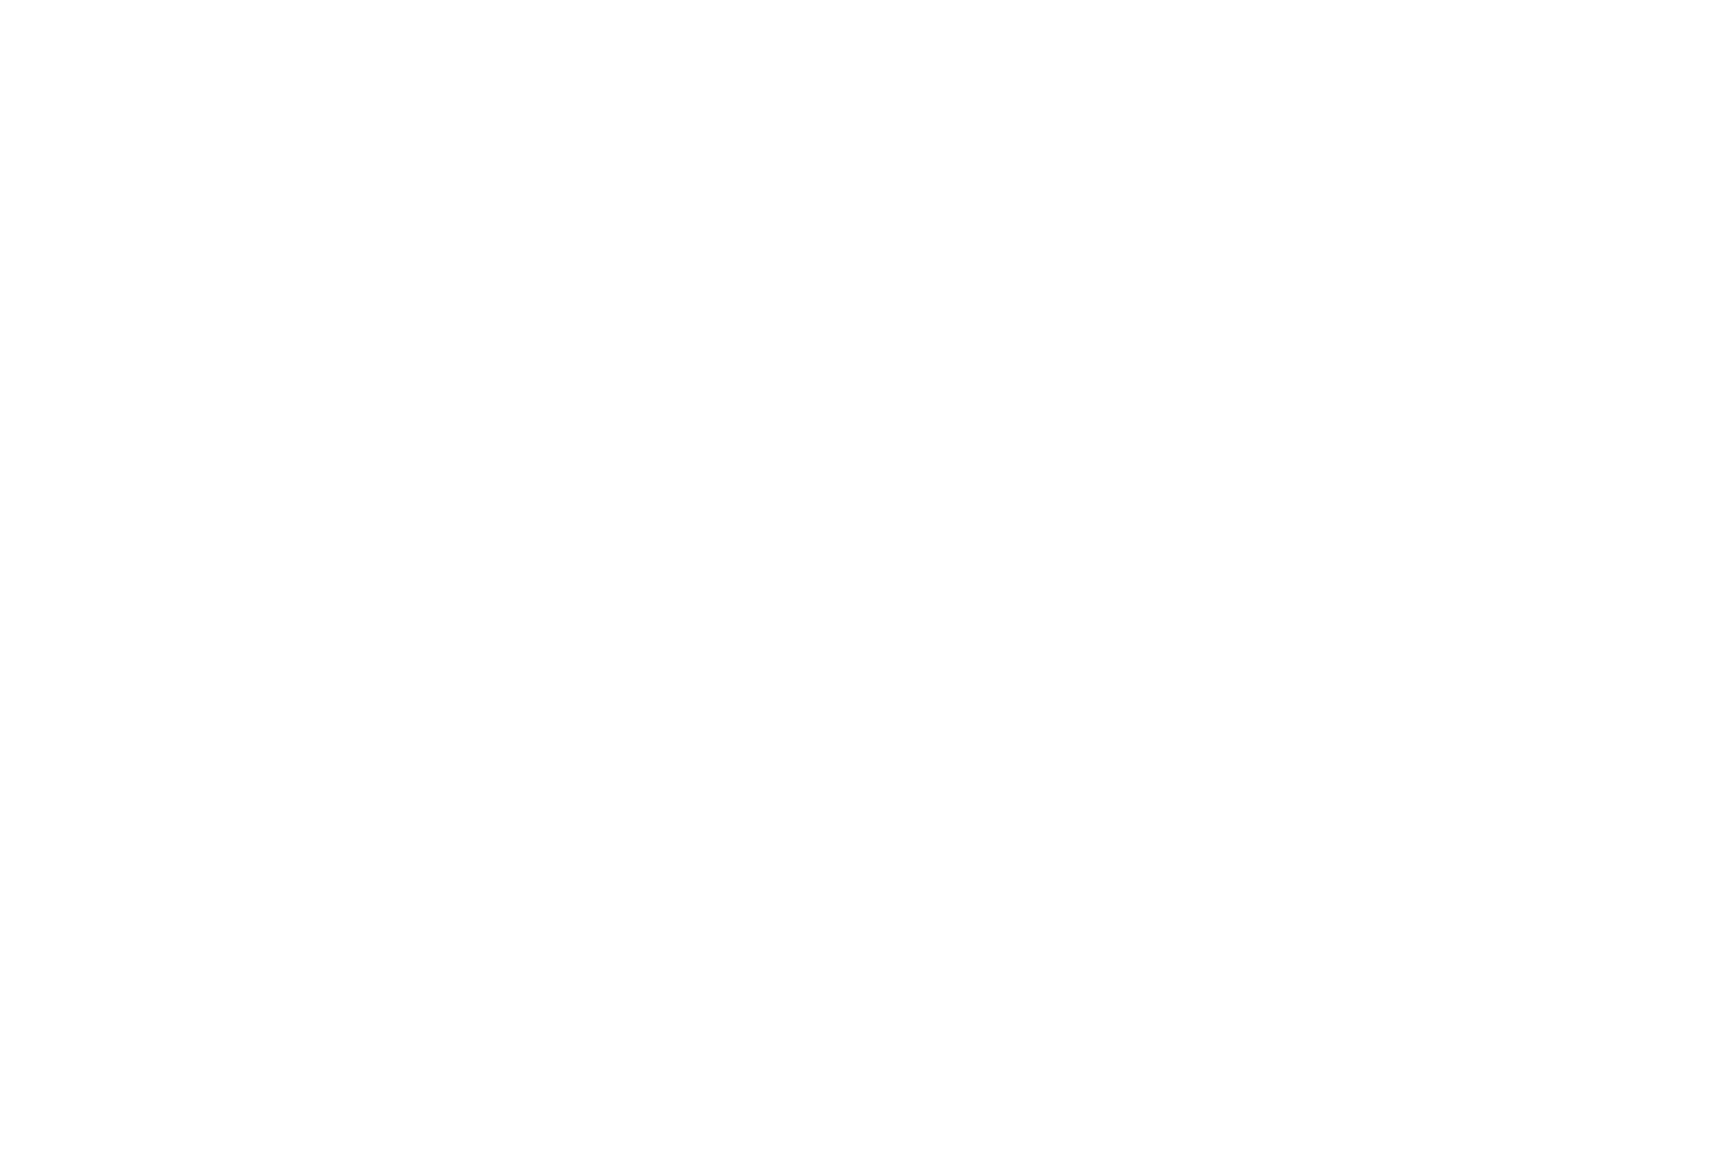 OFFICIAL SELECTION - AMERICAN FILMATIC ARTS AWARDS - 2017 (1).png